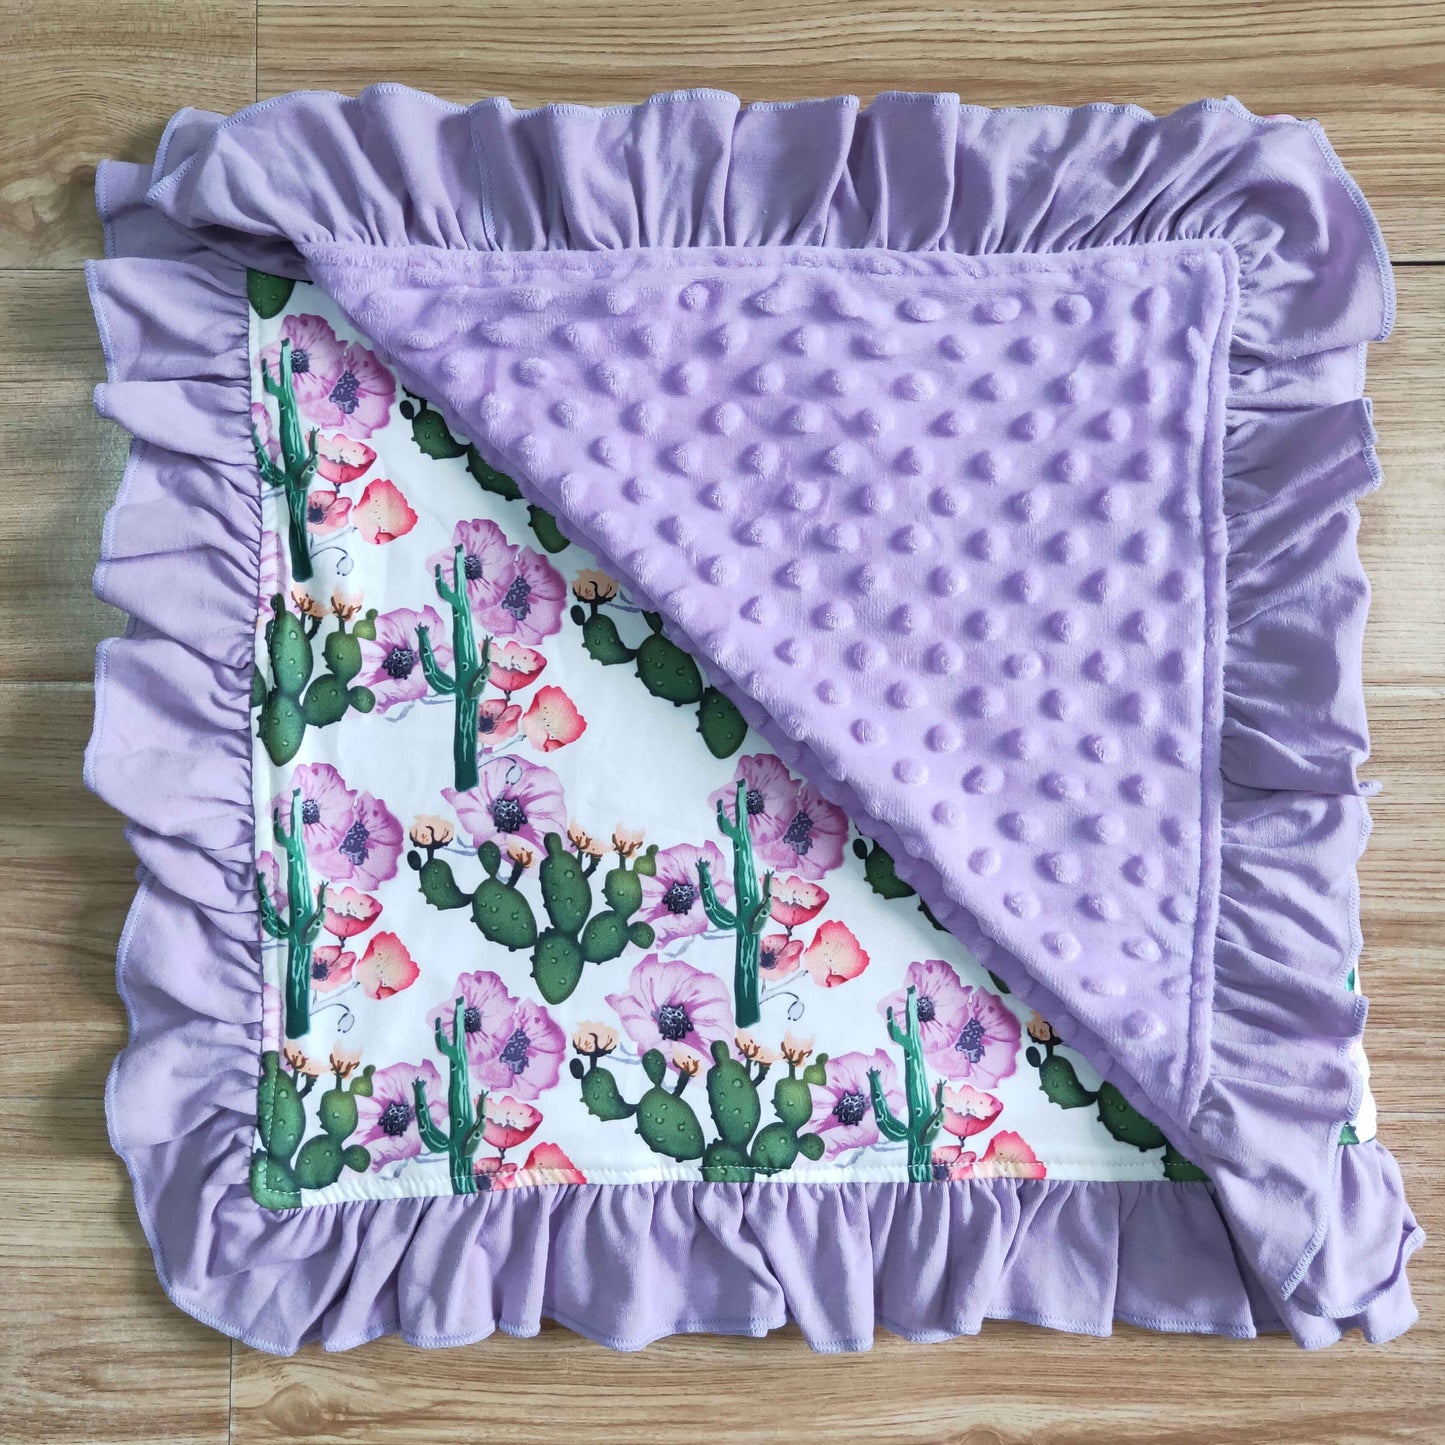 Cactus floral lavender minky baby blankets